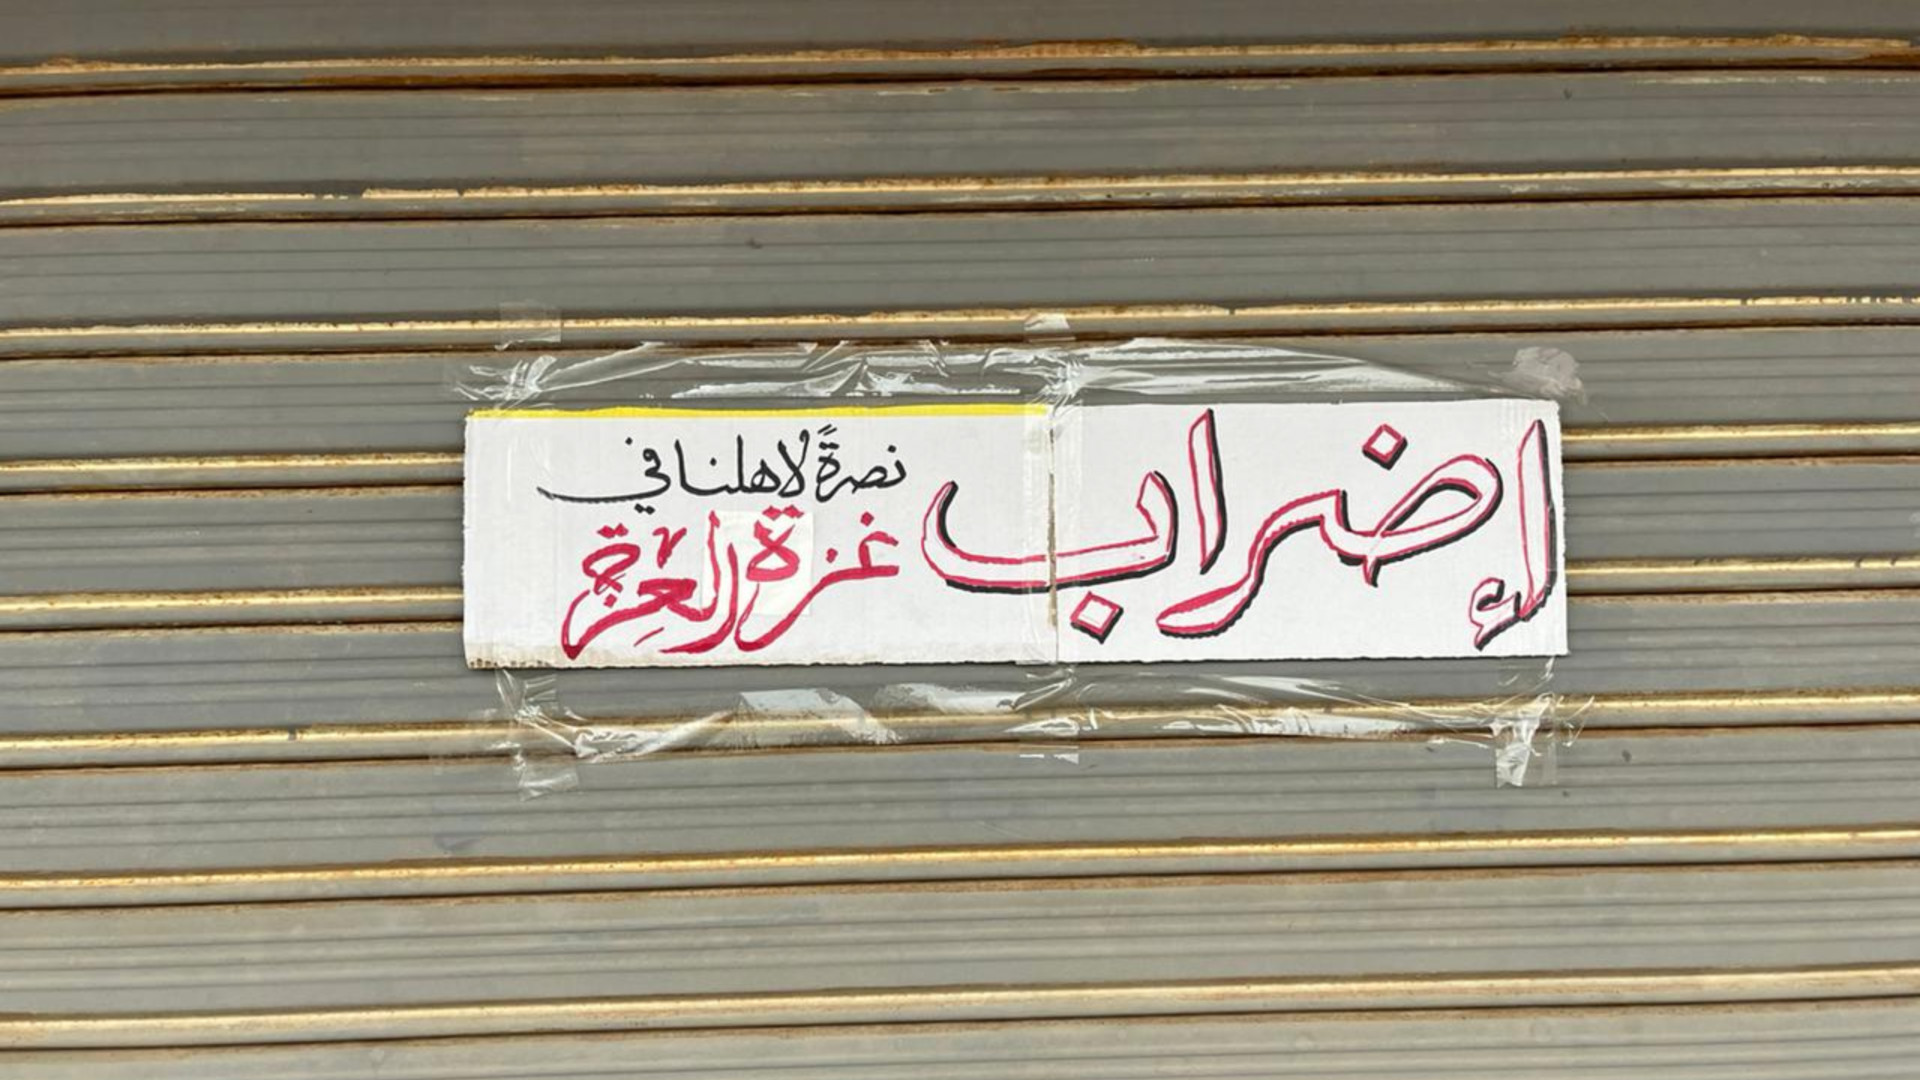 A sign placed on a shuttered shop in the Jordanian capital Amman to announce participation in the global strike for Gaza (MEE/Mohammad Ersan)